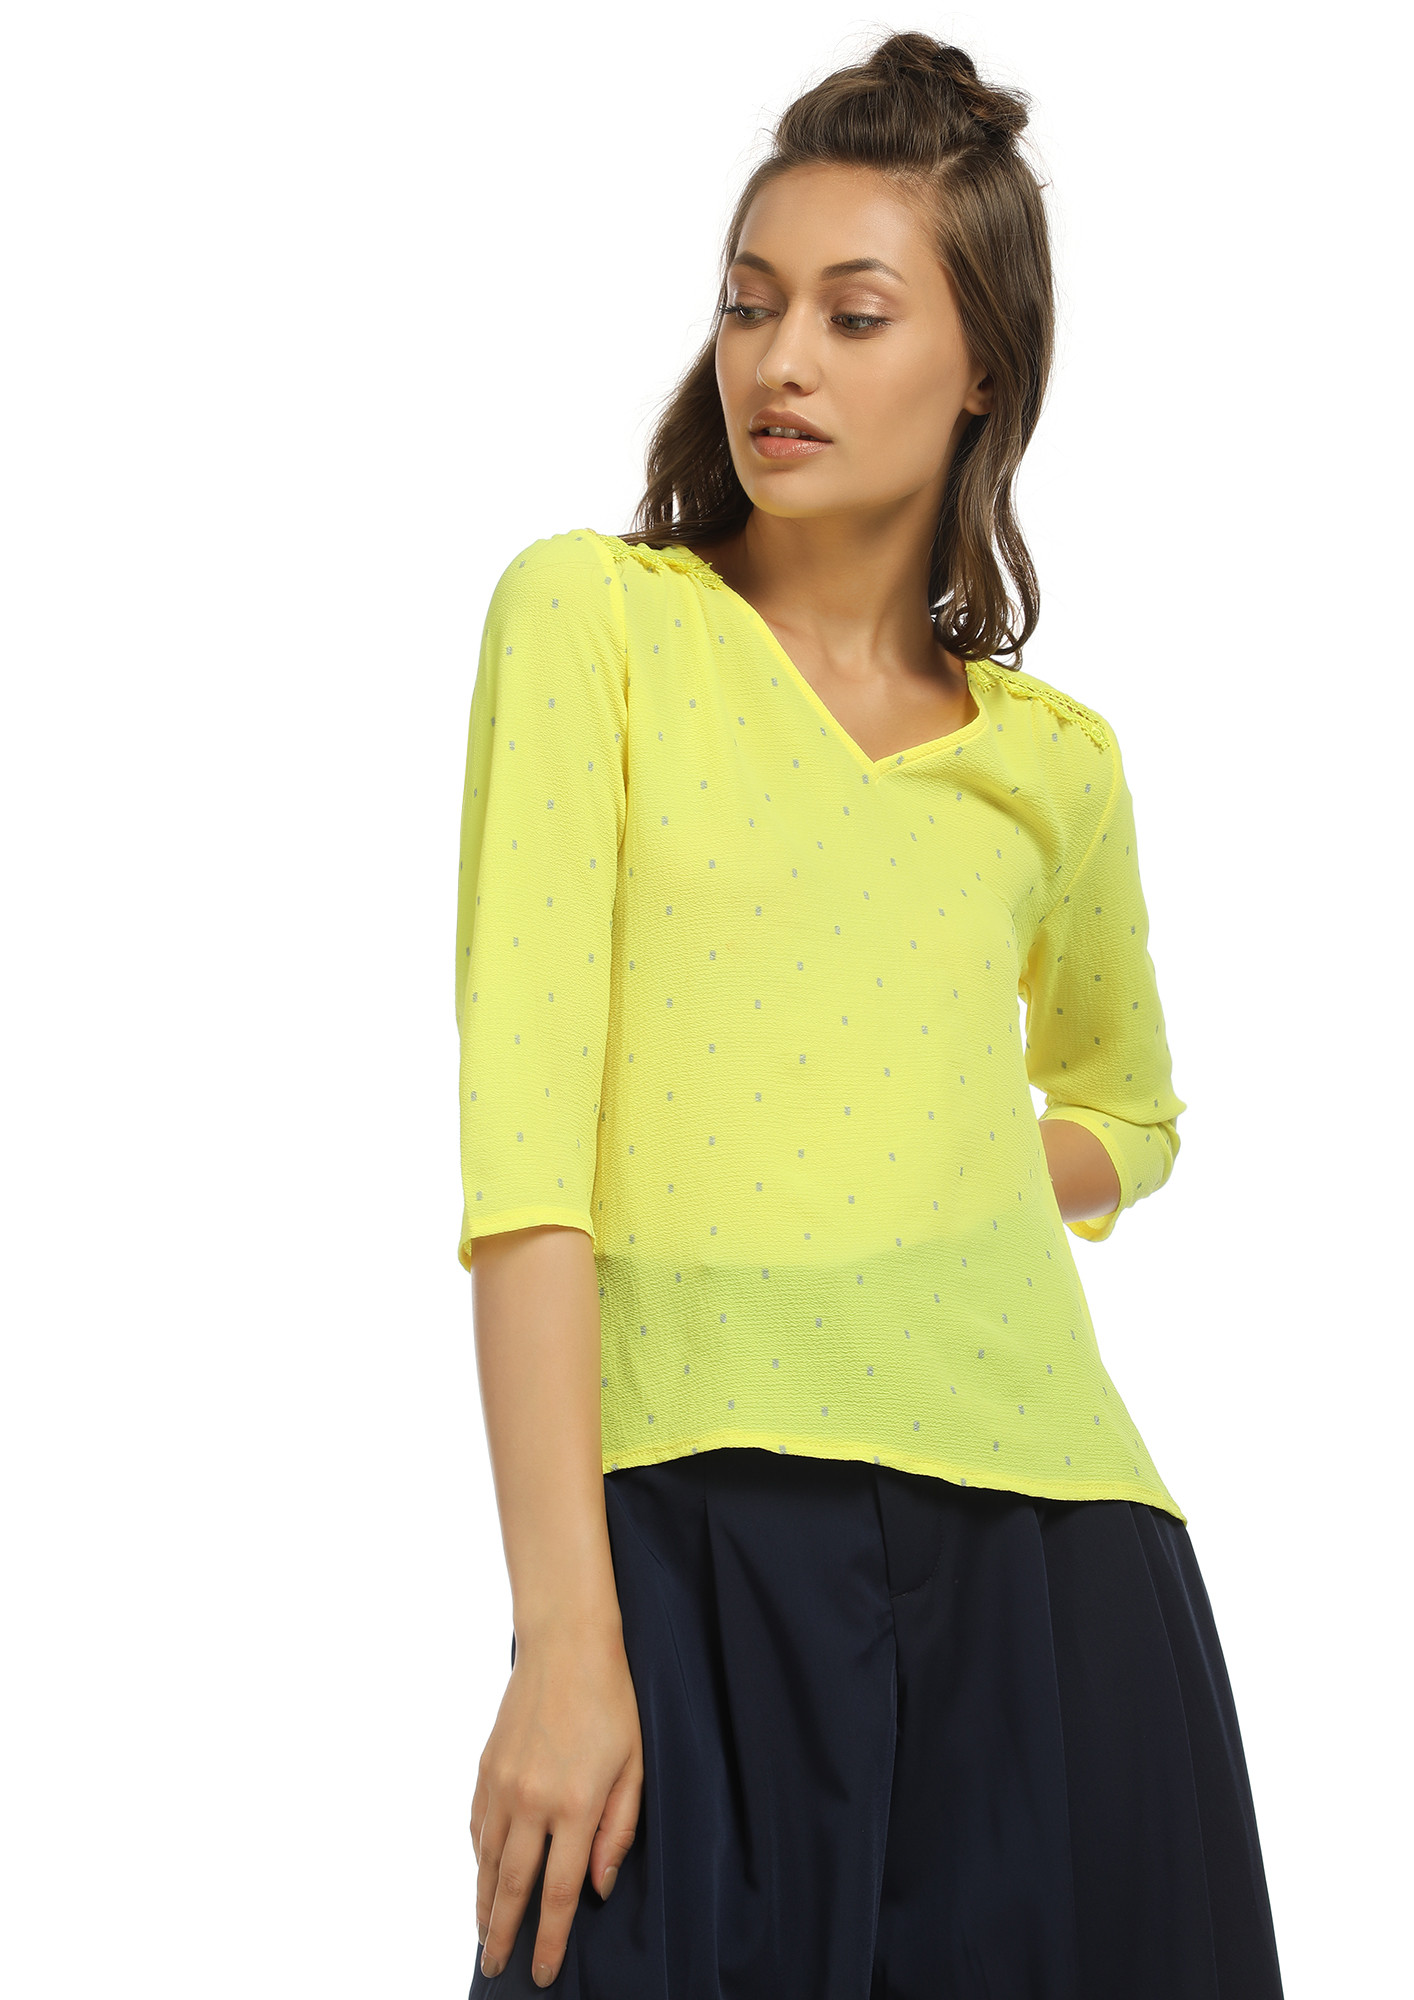 DO THE DITSY YELLOW TOP